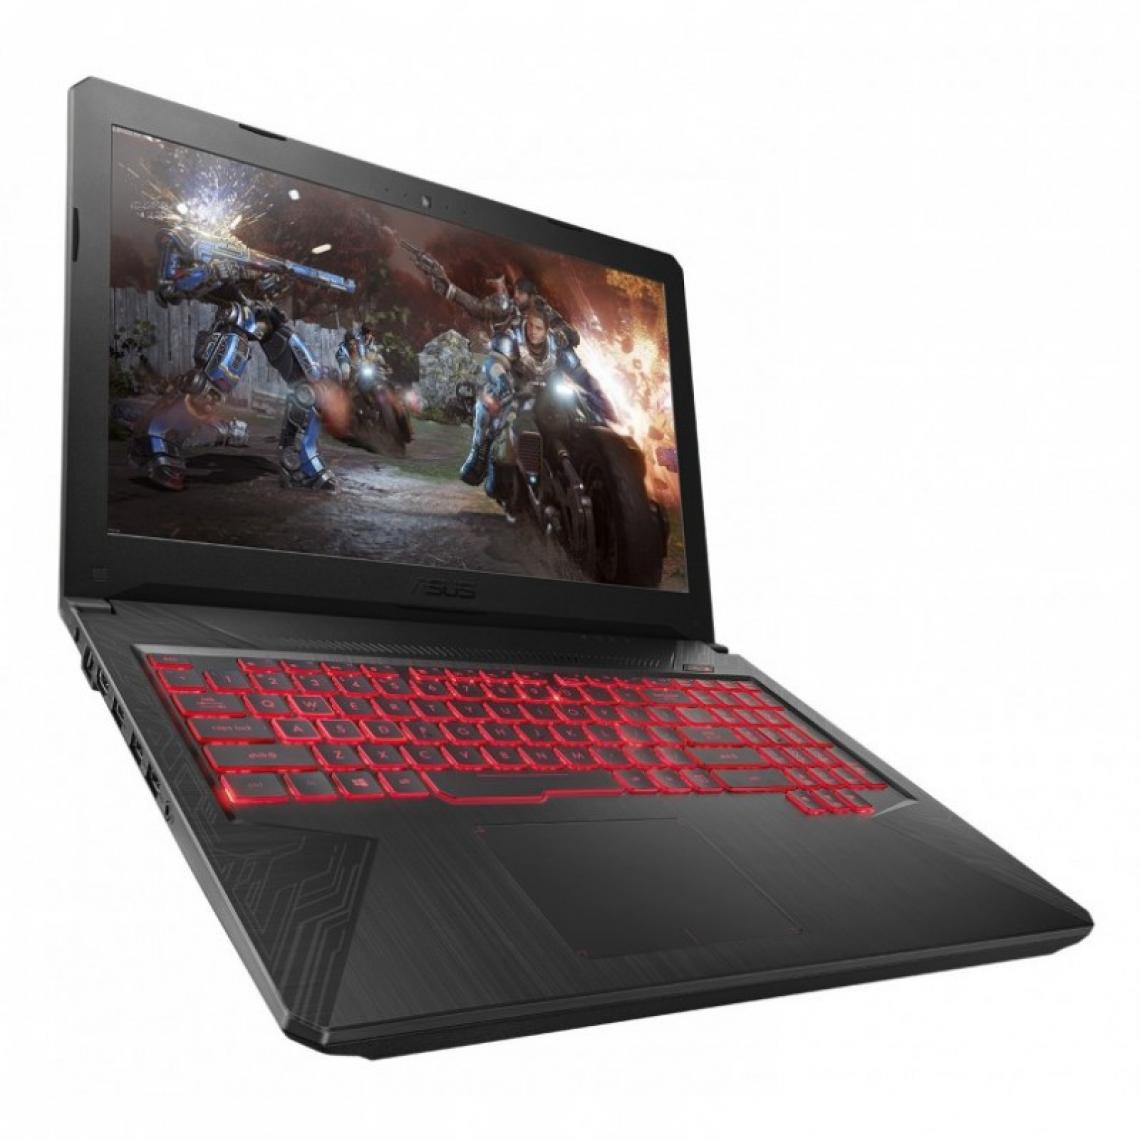 Asus - Asus TUF Gaming TUF504GD-DM1257T 15" Core i5 2,3 Ghz - Hdd 1 To - RAM 8 Go - Nvidia GeForce GTX 1050 Azerty - Français - PC Portable Gamer